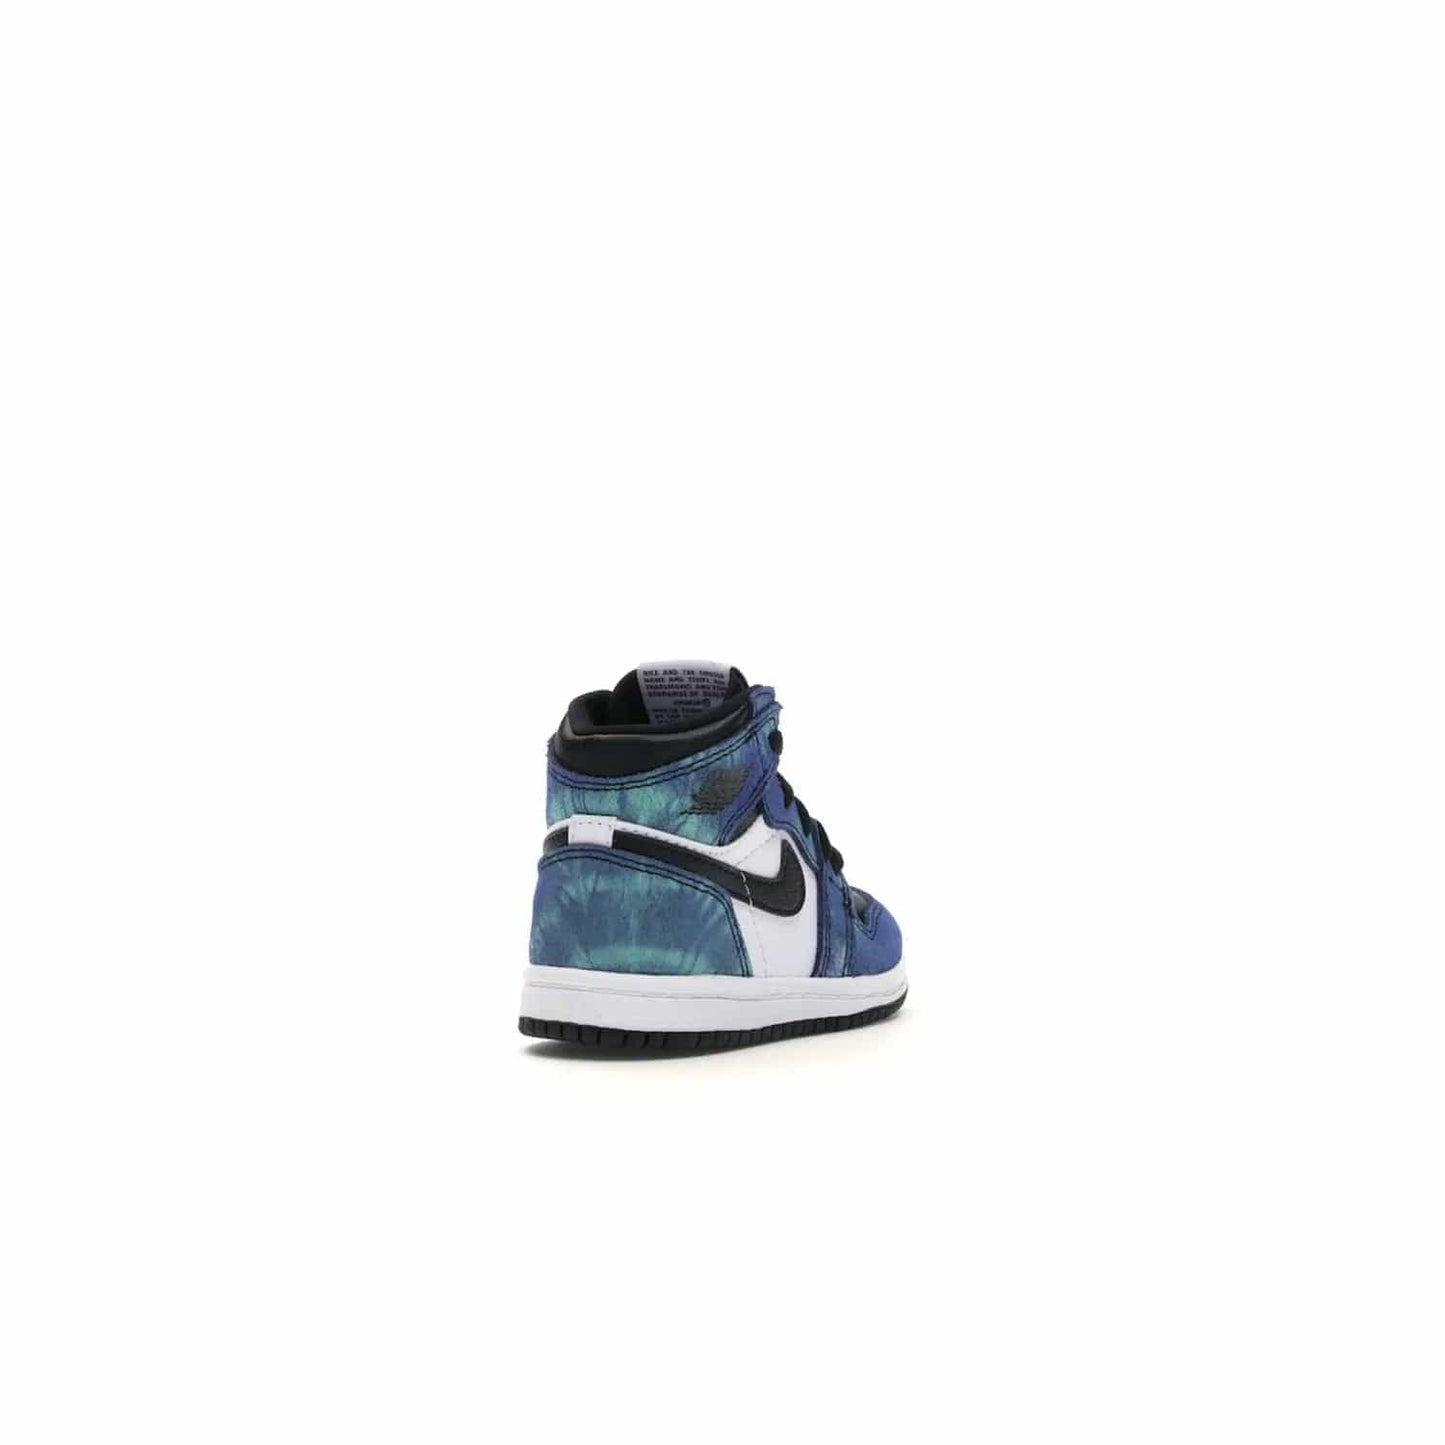 Jordan 1 Retro High Tie Dye (TD) - Image 31 - Only at www.BallersClubKickz.com - Add a unique twist to your sneaker collection with the Jordan 1 Retro High Tie Dye (TD). Classic Air Jordan 1 details like toe box perforations and the signature Swoosh logo on the sidewall are topped with an eye-catching tie dye design that’s perfect for styling all year round.